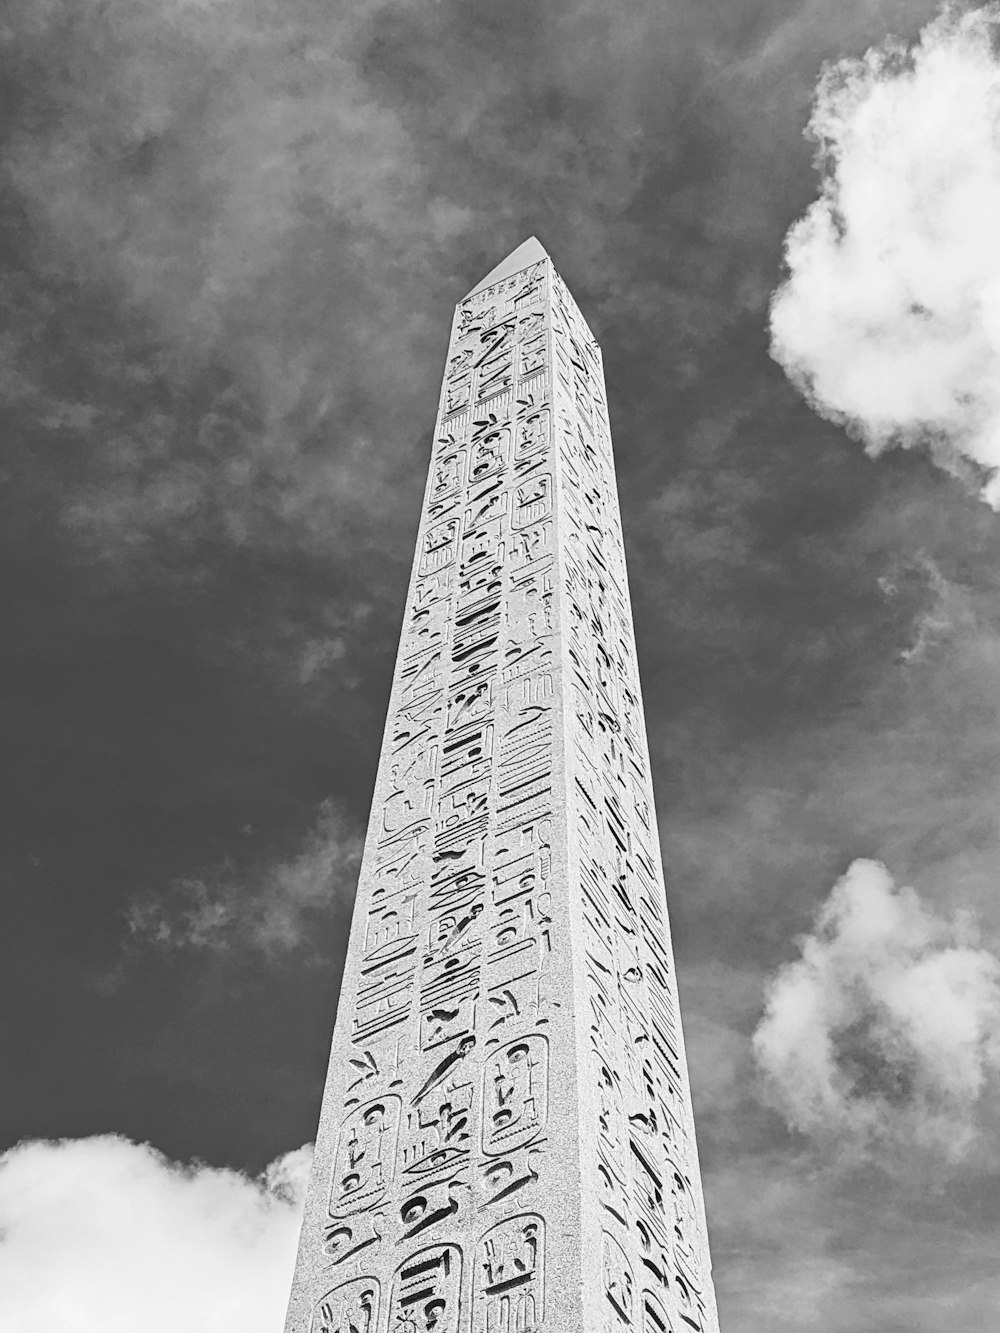 a tall obelisk with writing on it against a cloudy sky